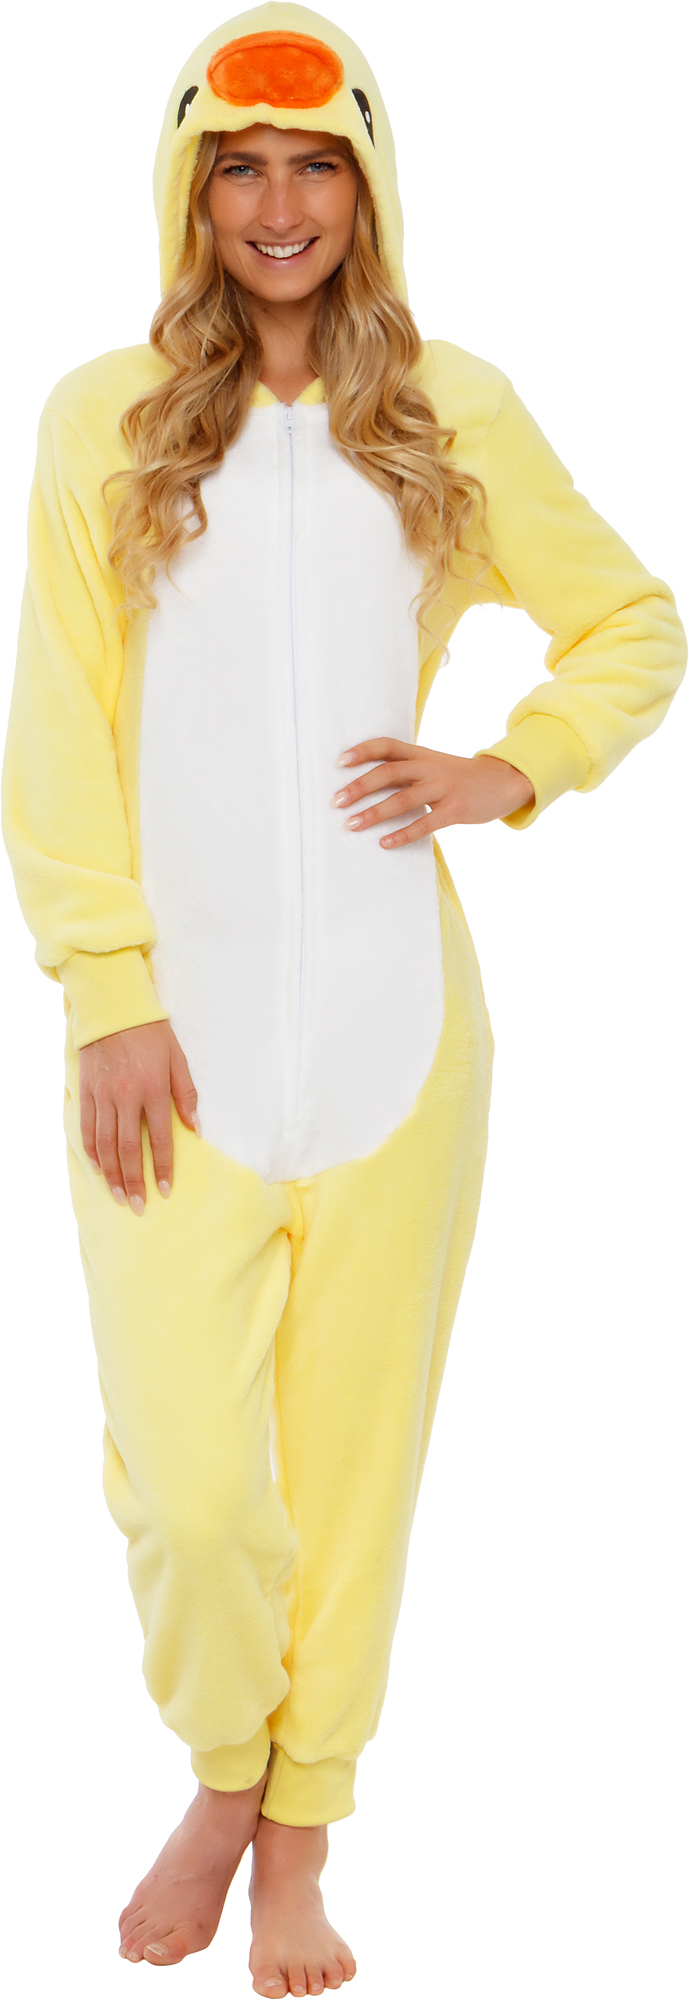 Adult One Piece Cosplay Elephant Costume by Silver Lilly Slim Fit Animal Pajamas